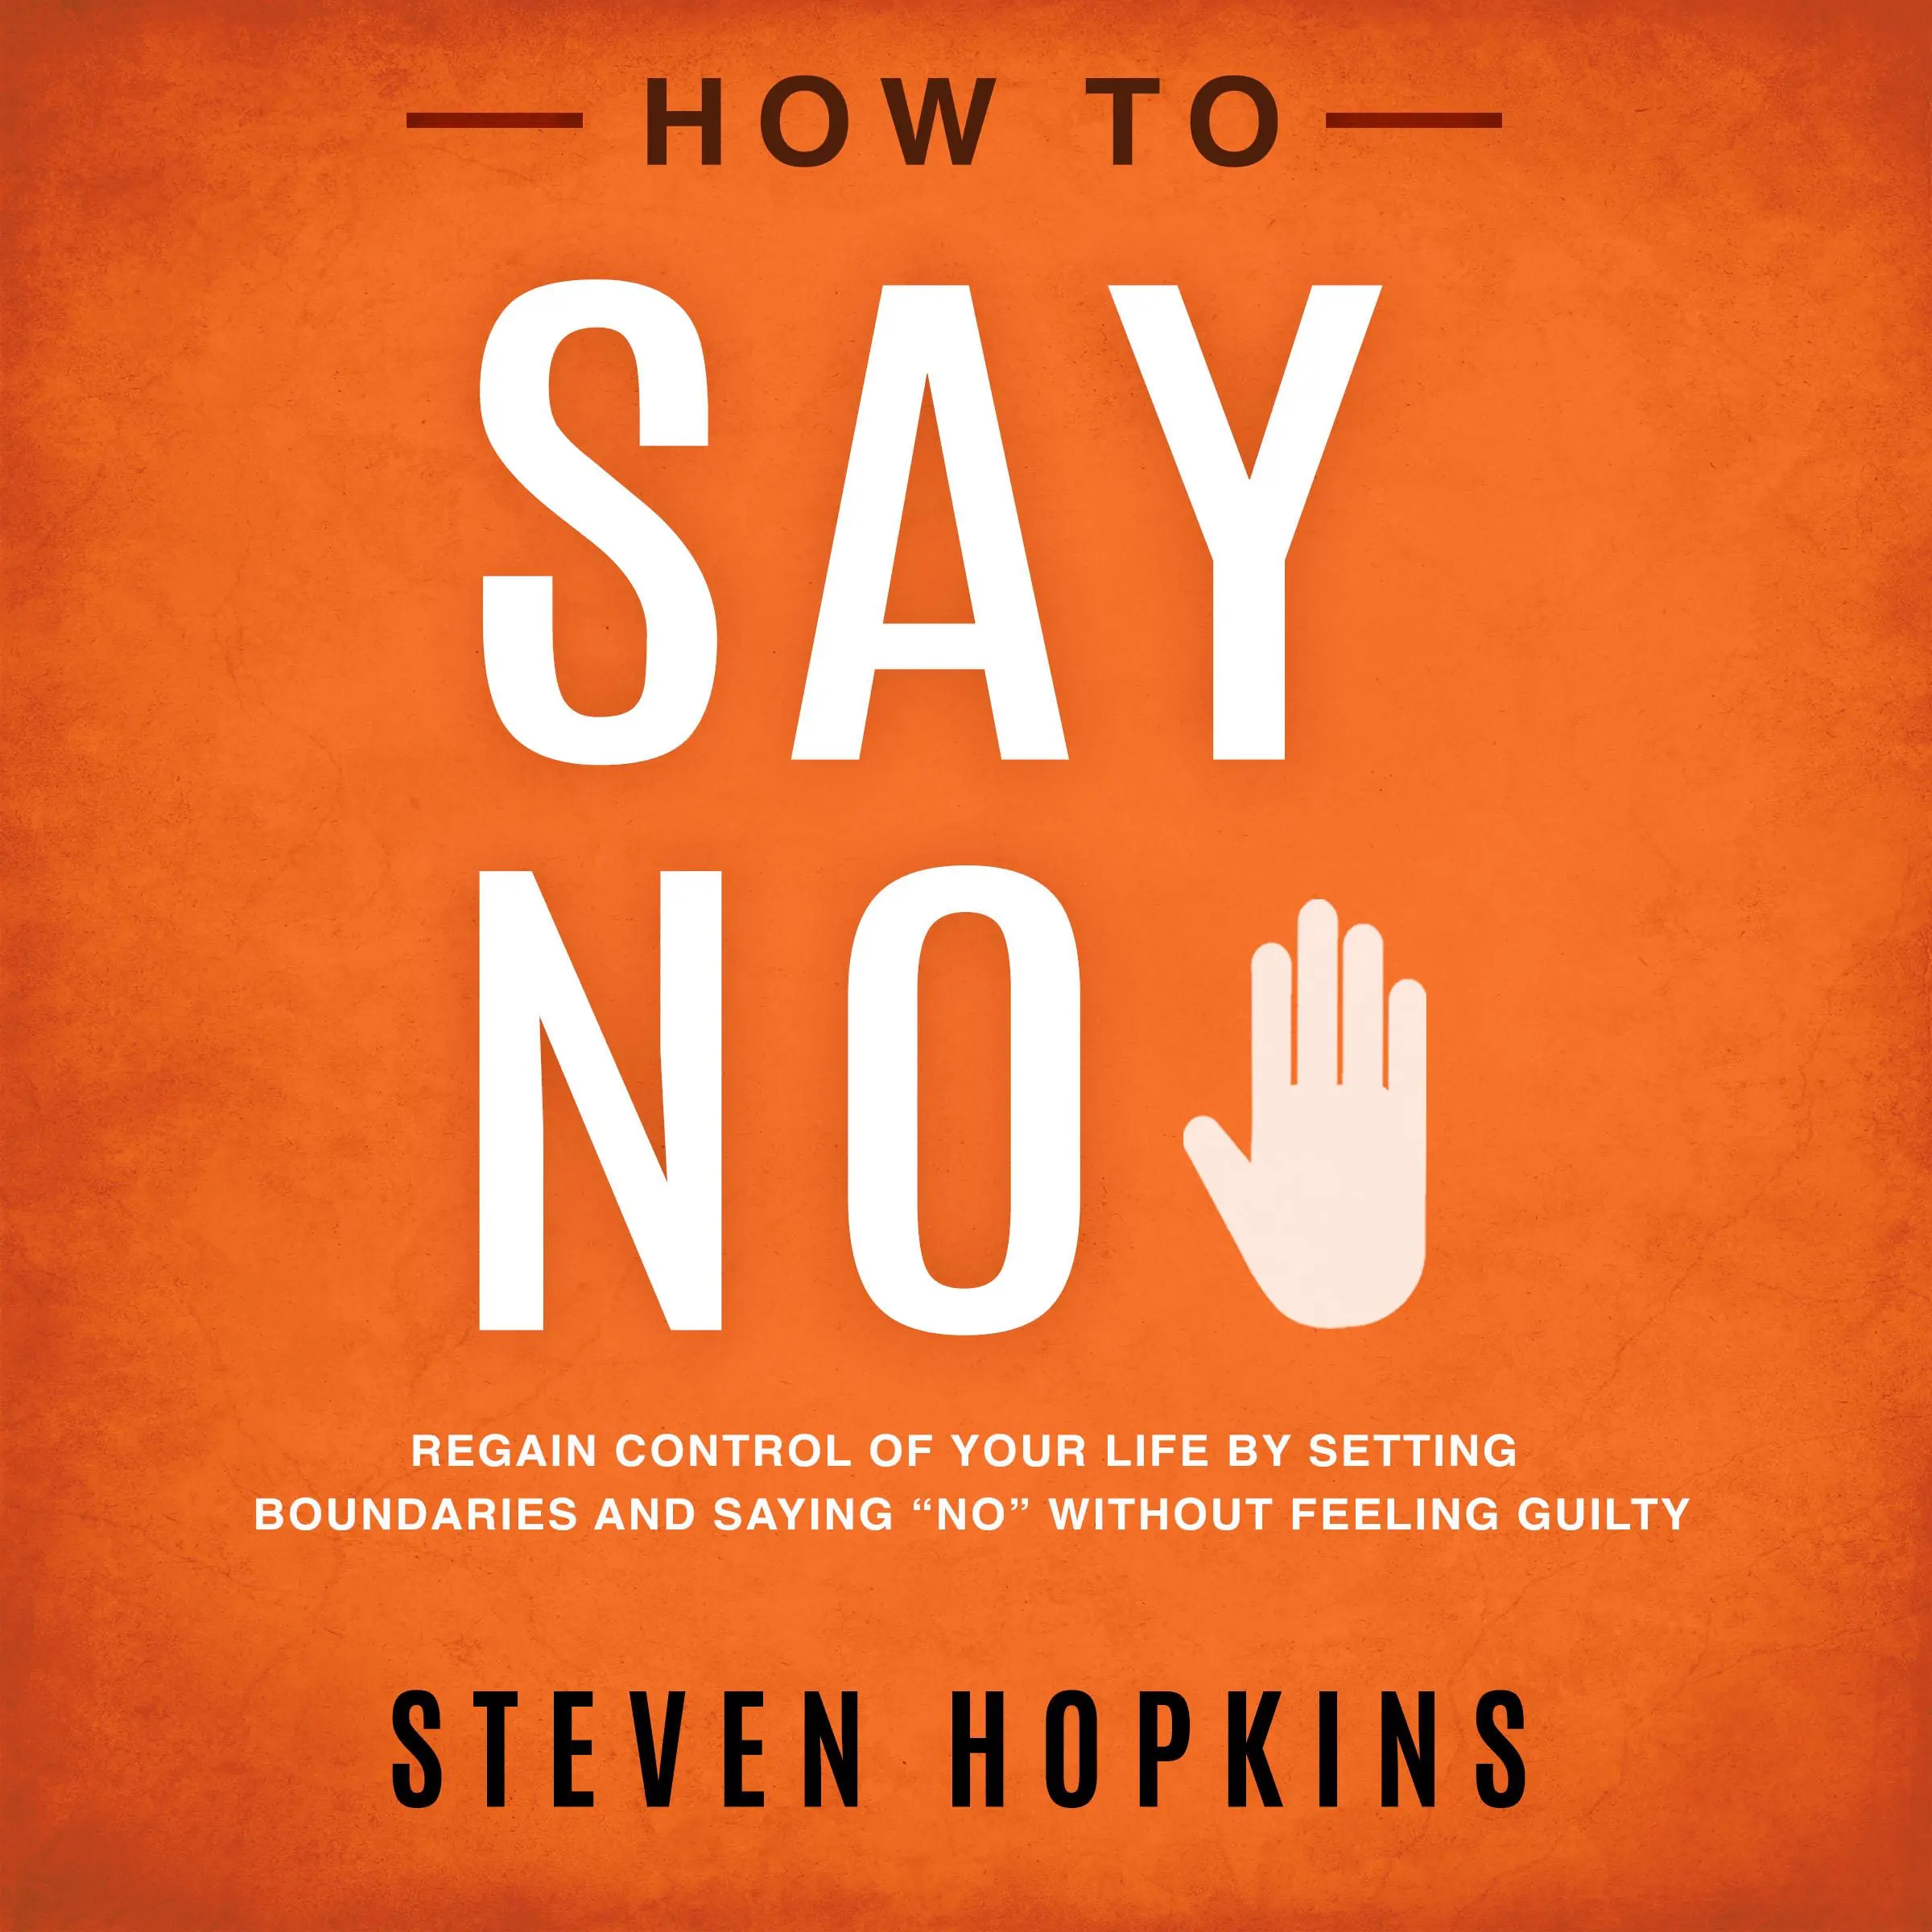 How to Say No: Regain Control of Your Life by Setting Boundaries and Saying “No” Without Feeling Guilty Audiobook by Steven Hopkins